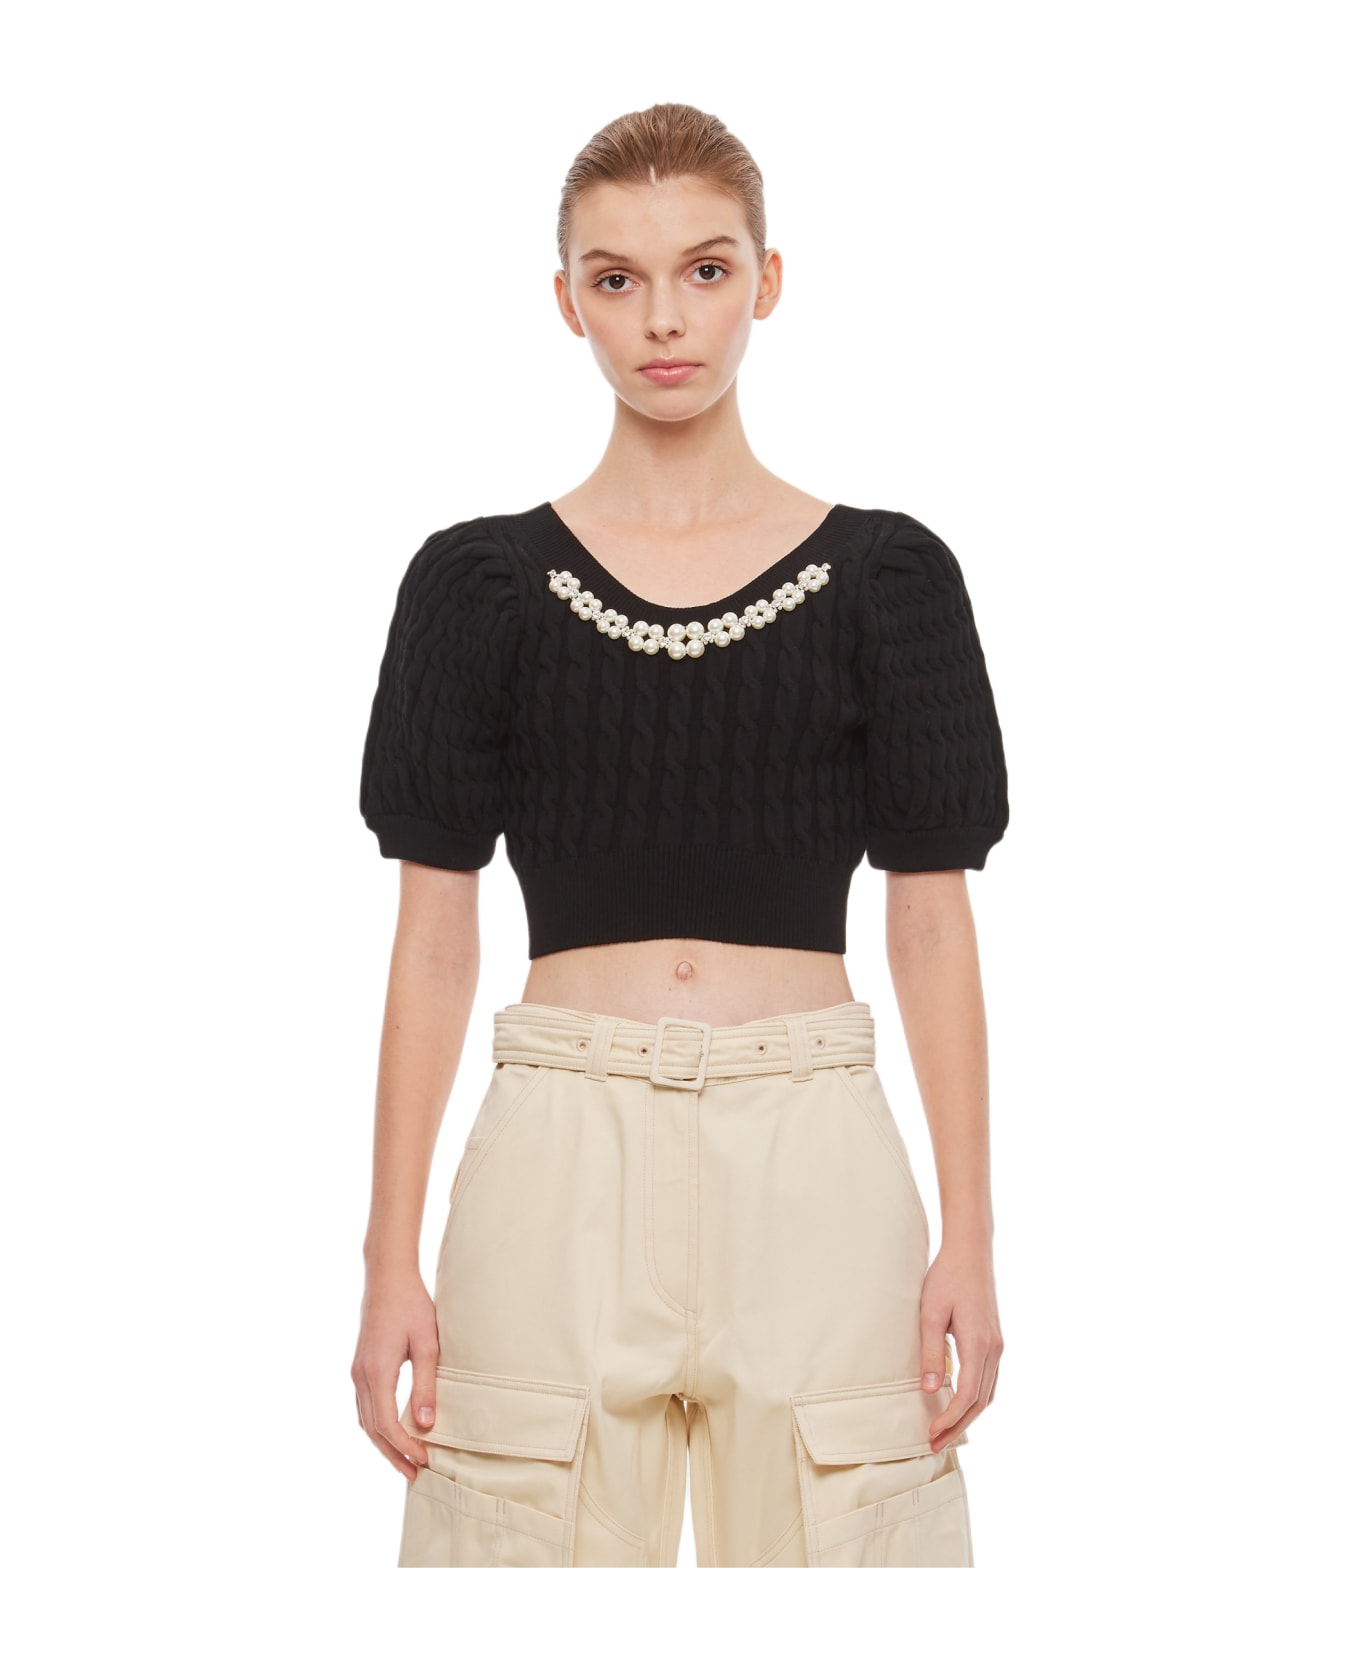 Simone Rocha Cropped Puff Sleeve Open Neck Cable Top - Black ニットウェア